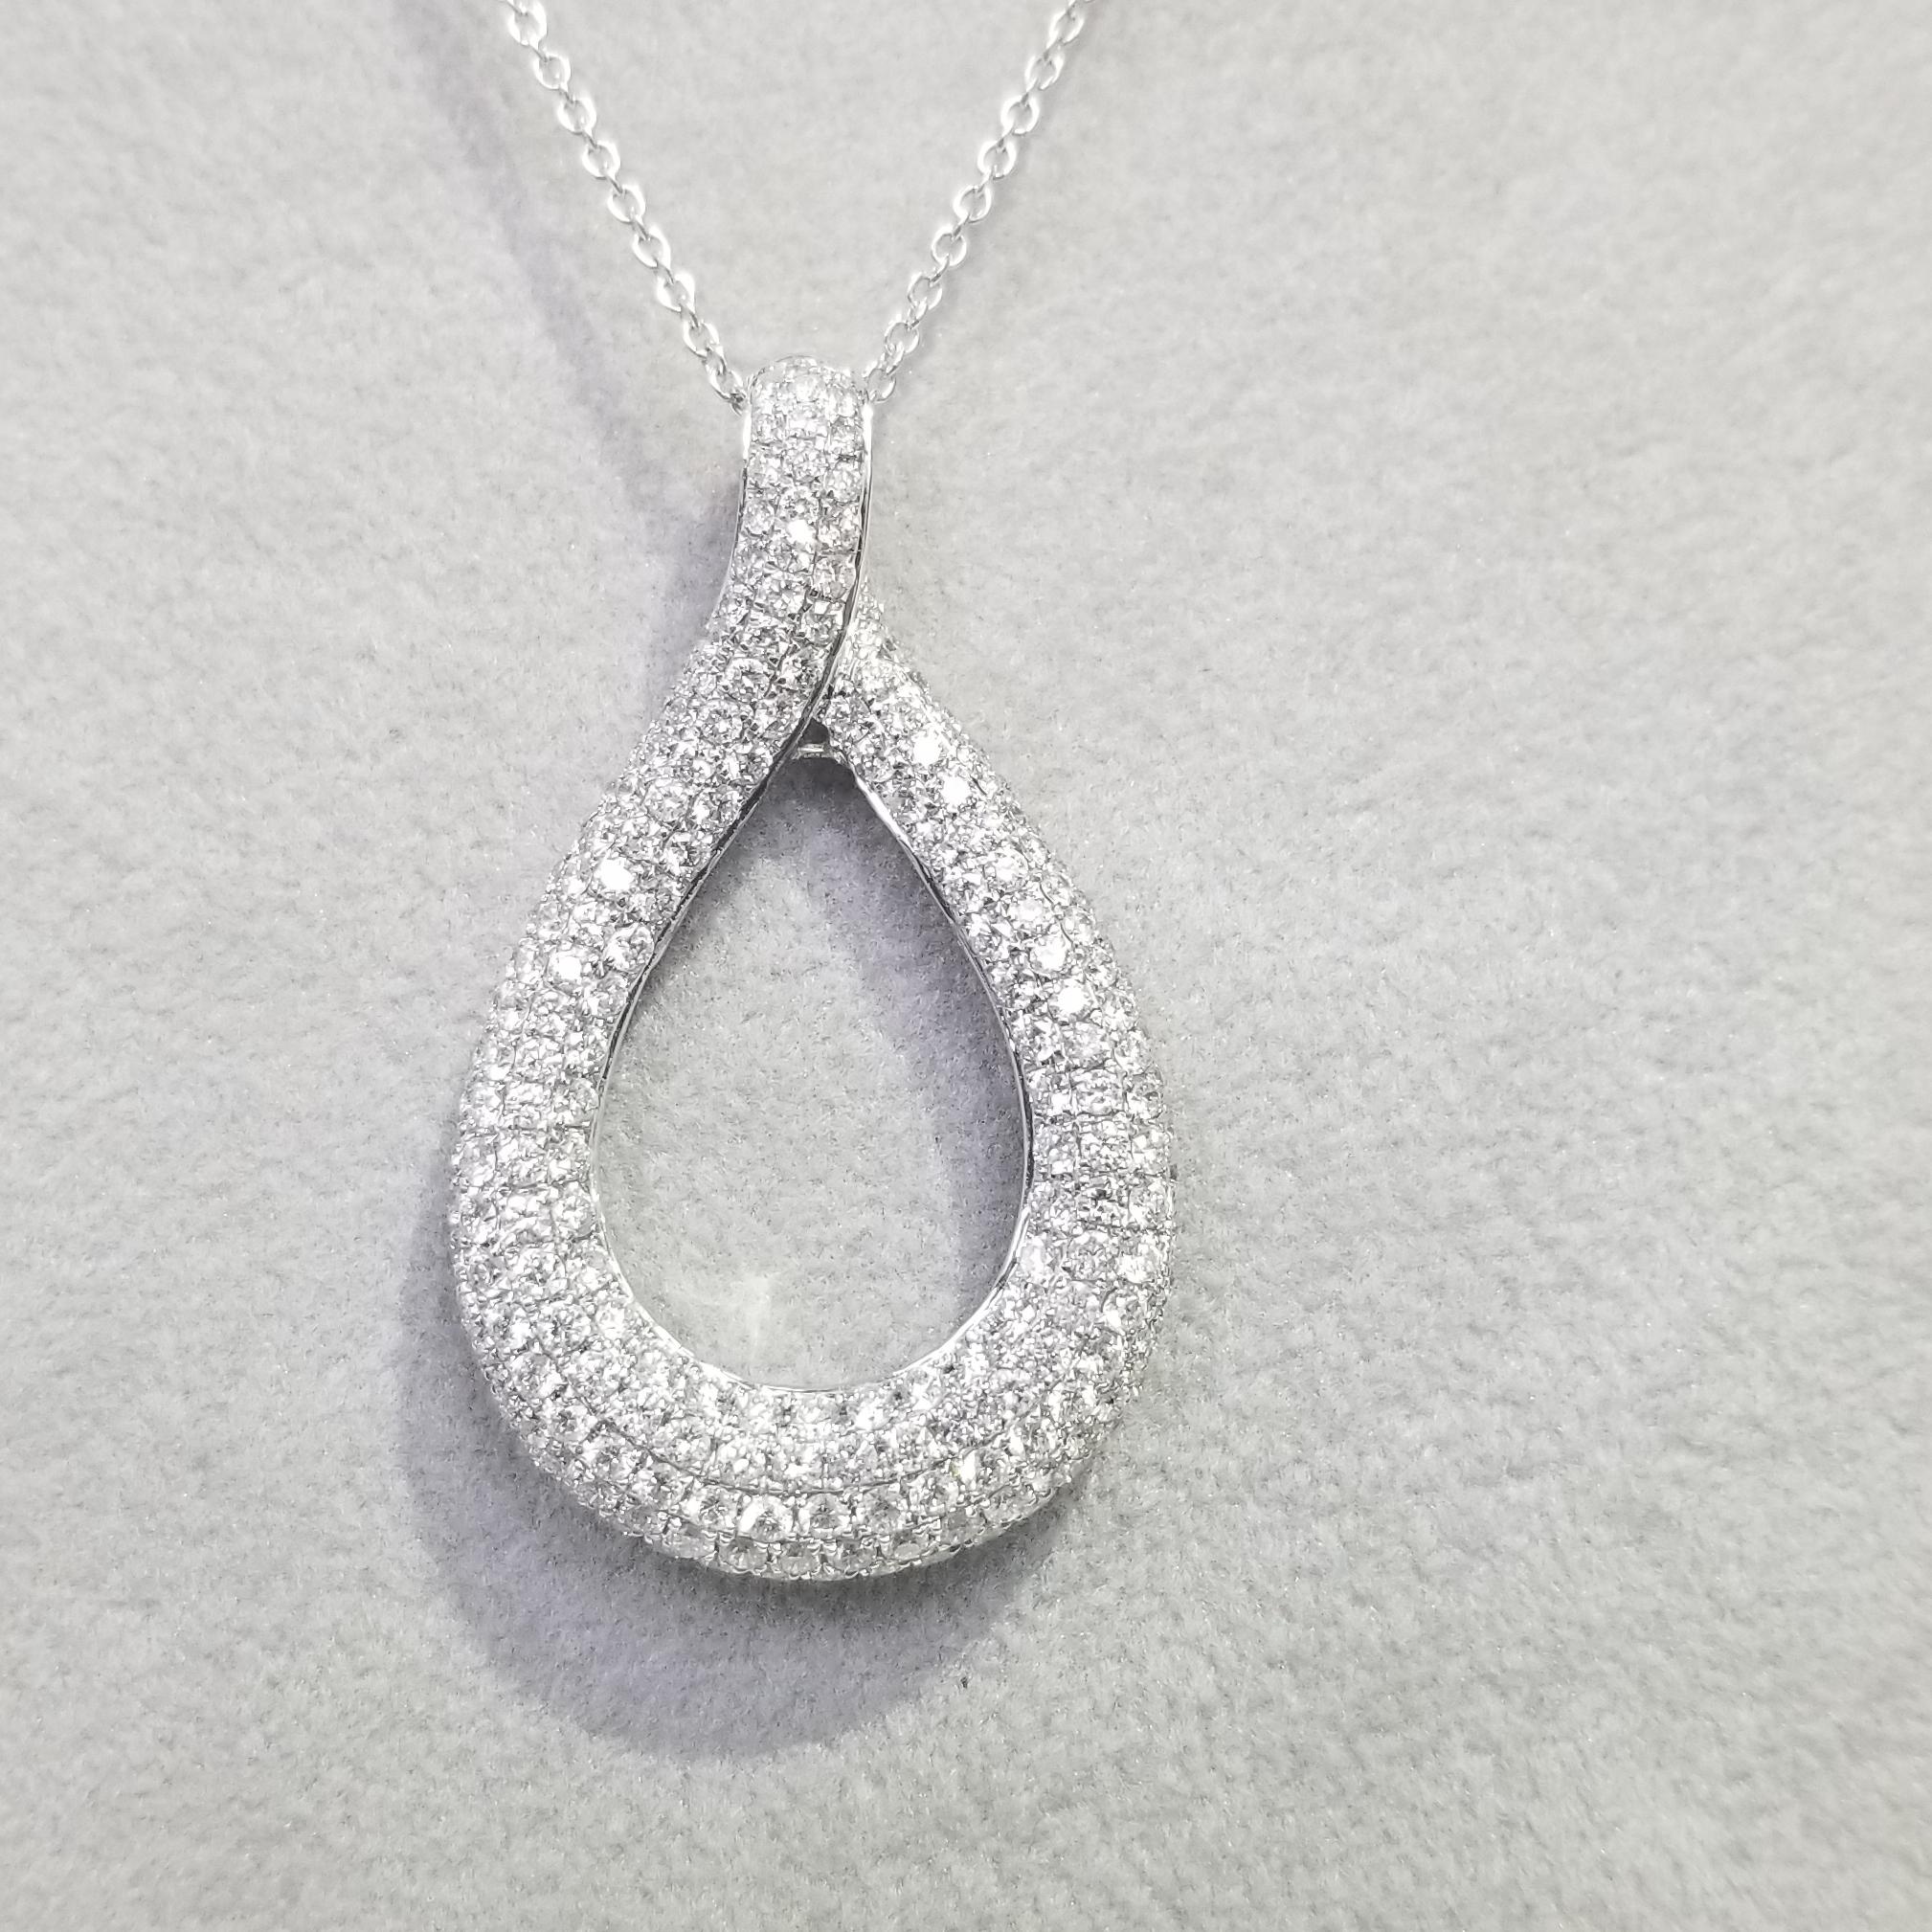  Bring the sophisticated look by wearing this classy diamond necklace. Perfect in any occasions. 
Specifications:
    main stone: ROUND CUT DIAMONDS
    diamonds: 185 PCS
    carat total weight: APPROX 2.50 CT
    color: G
    clarity: VS2
   